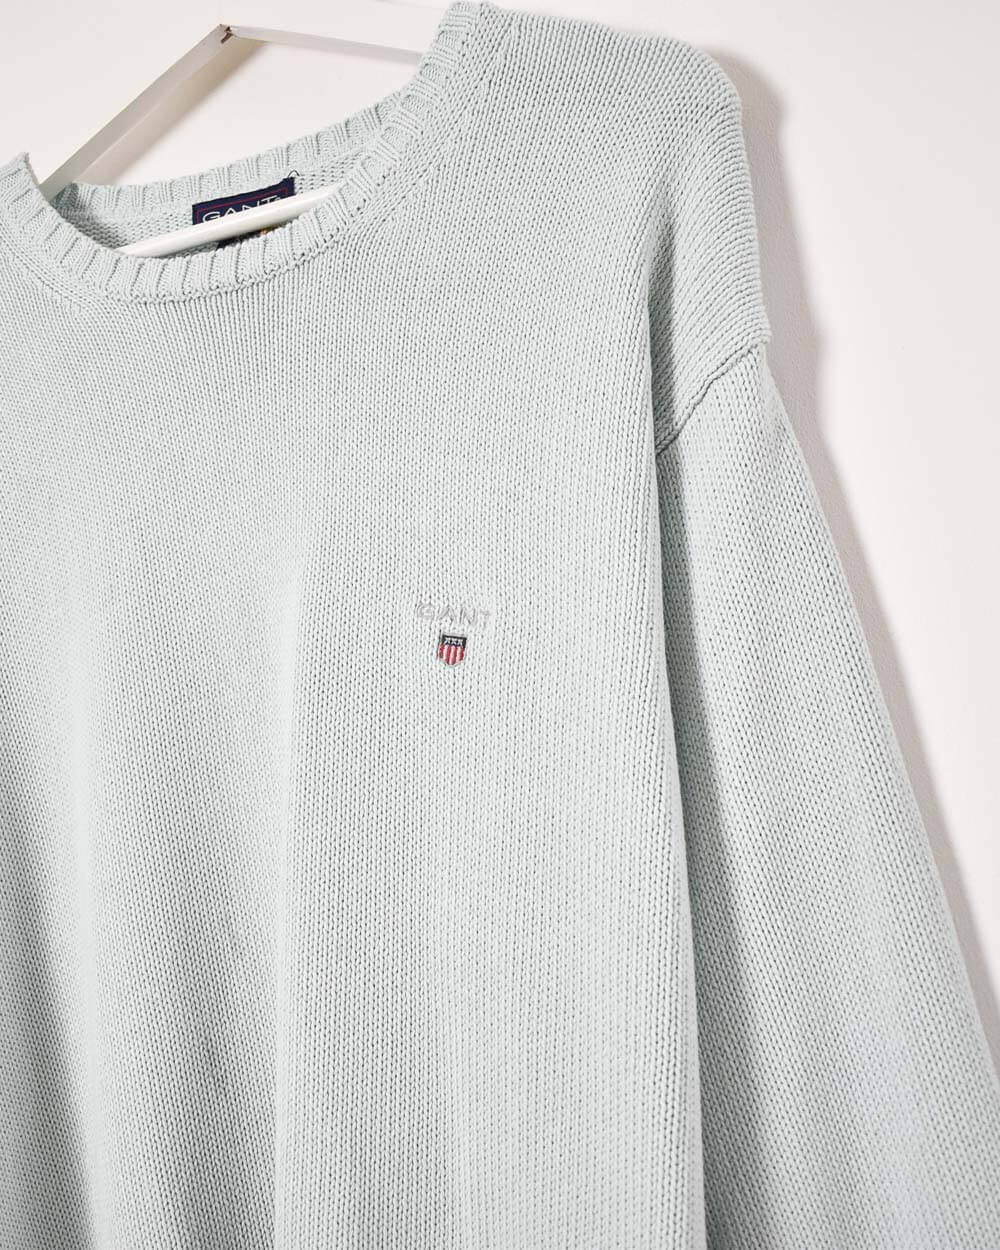 Gant Knitted Sweatshirt - X-Large - Domno Vintage 90s, 80s, 00s Retro and Vintage Clothing 